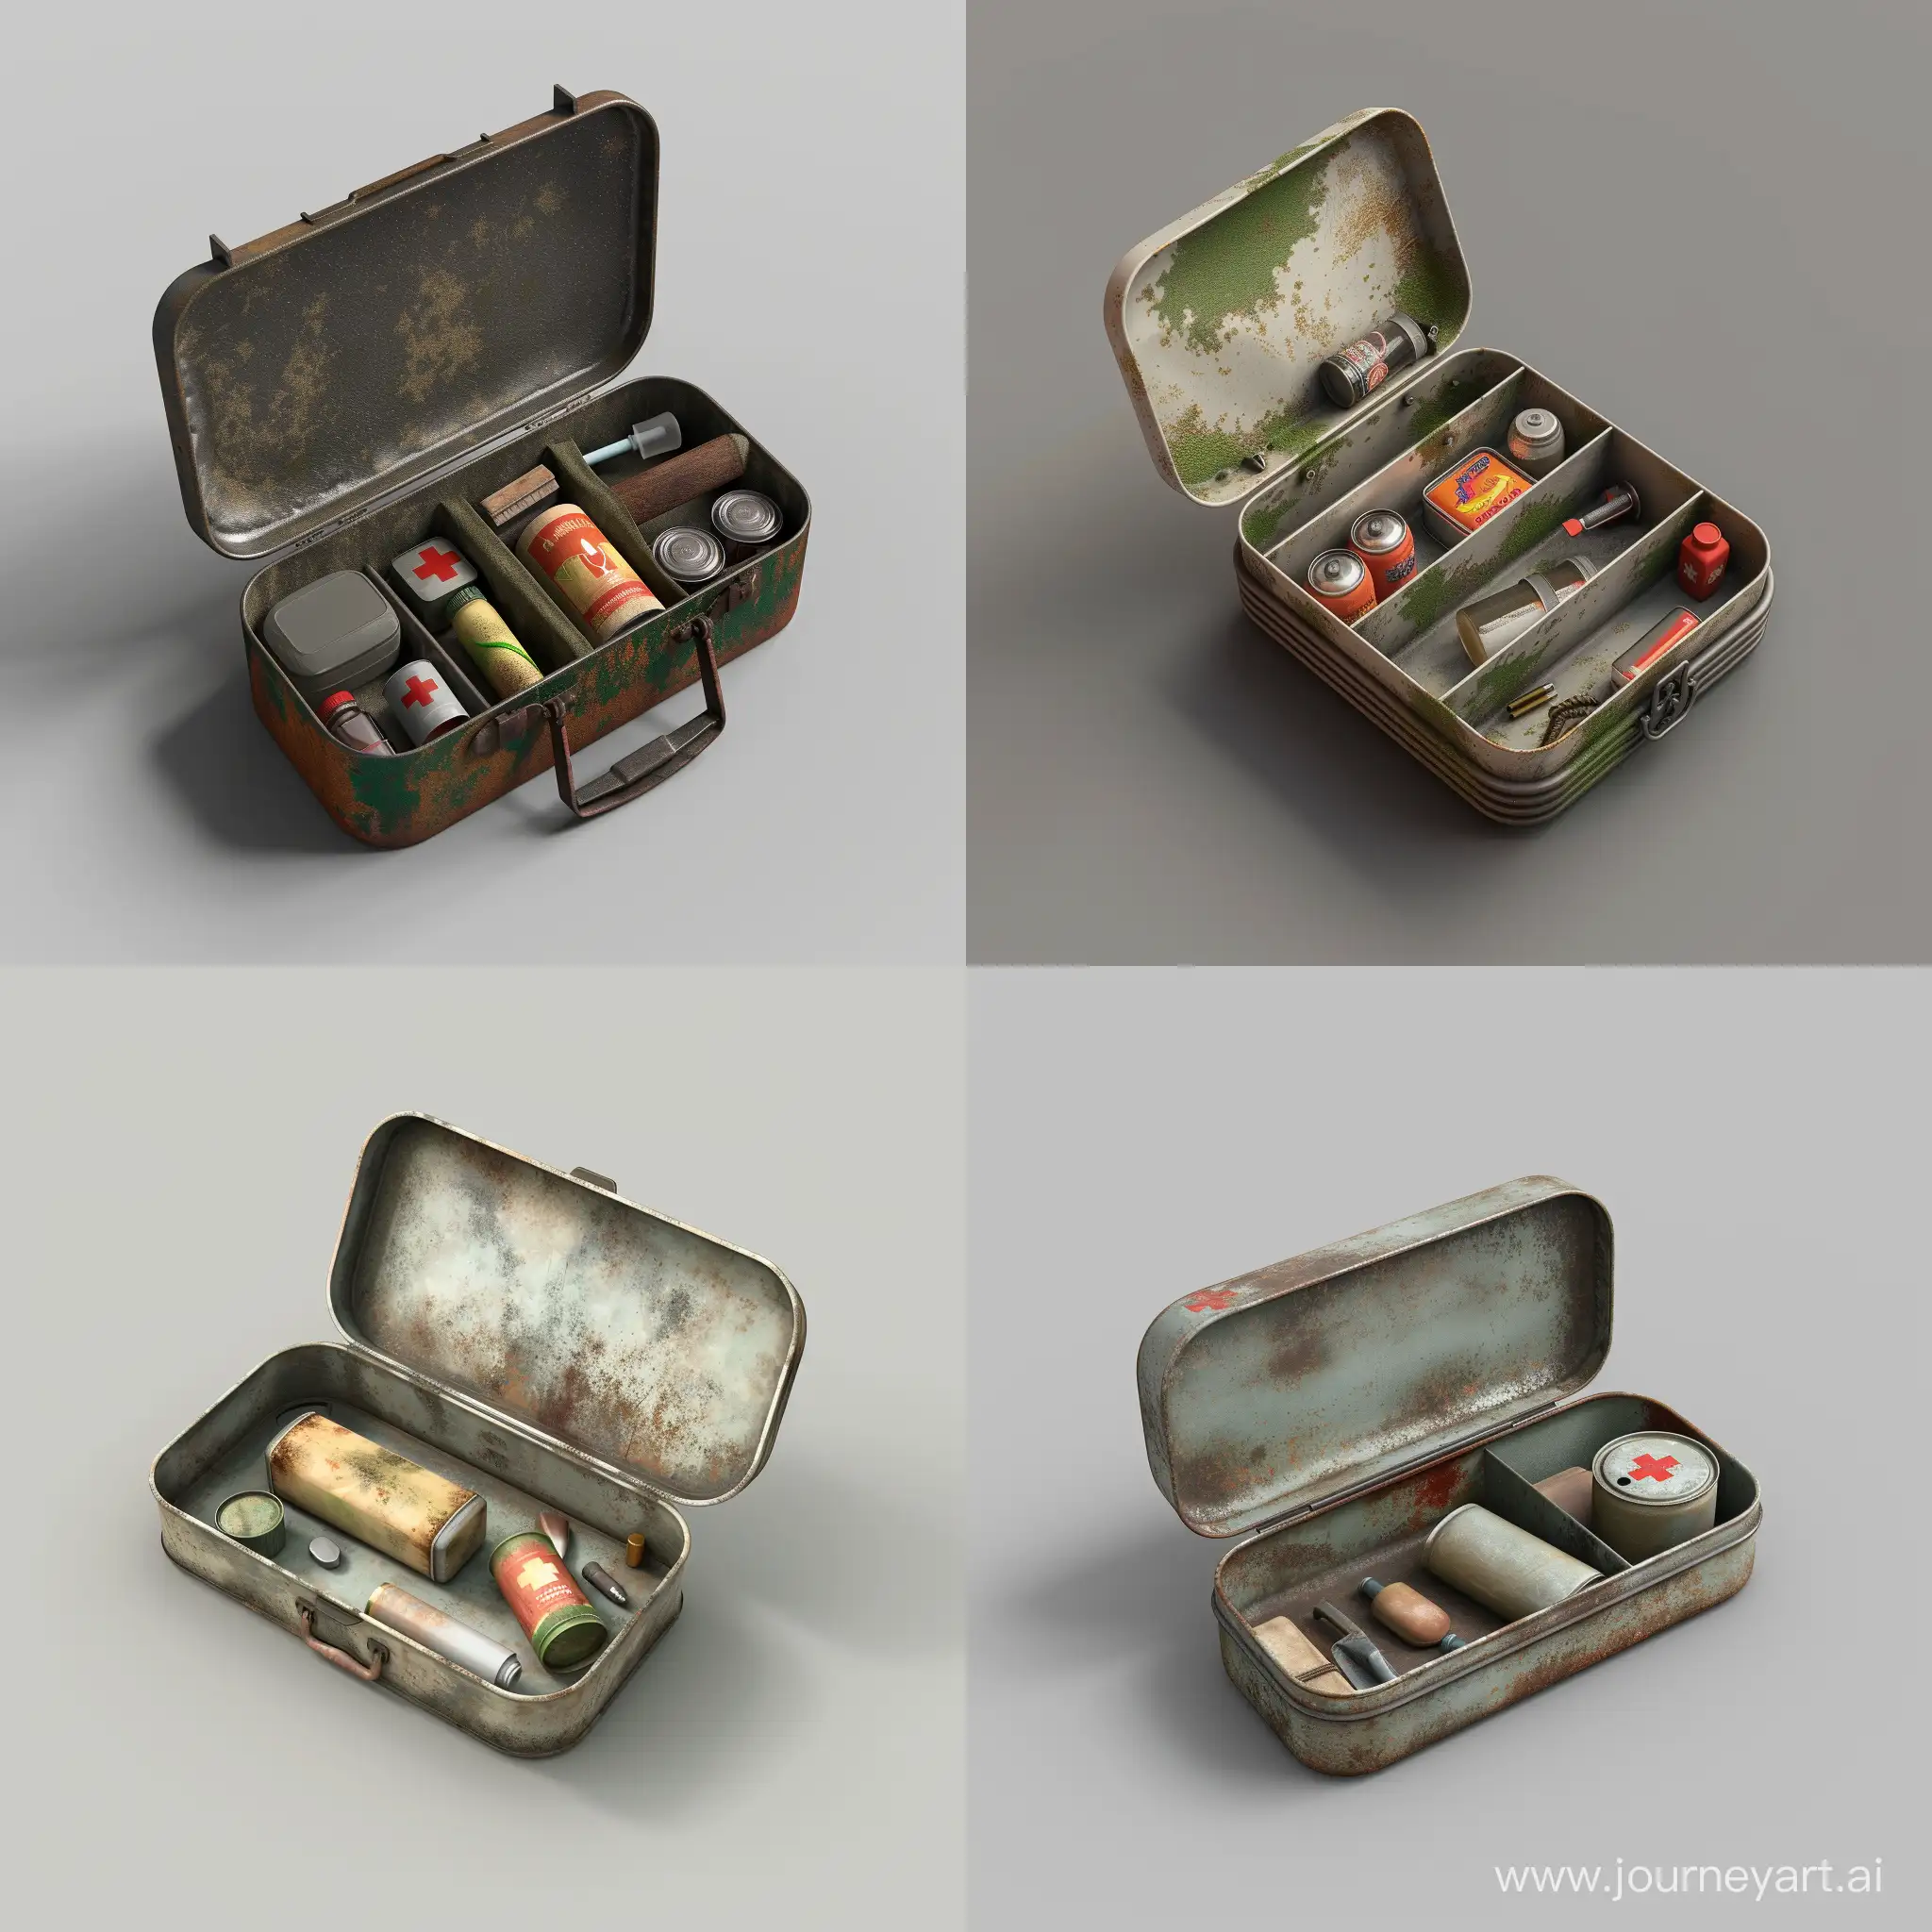 Compact-Isometric-Survival-Kit-in-Worn-Metal-Case-Stalker-Style